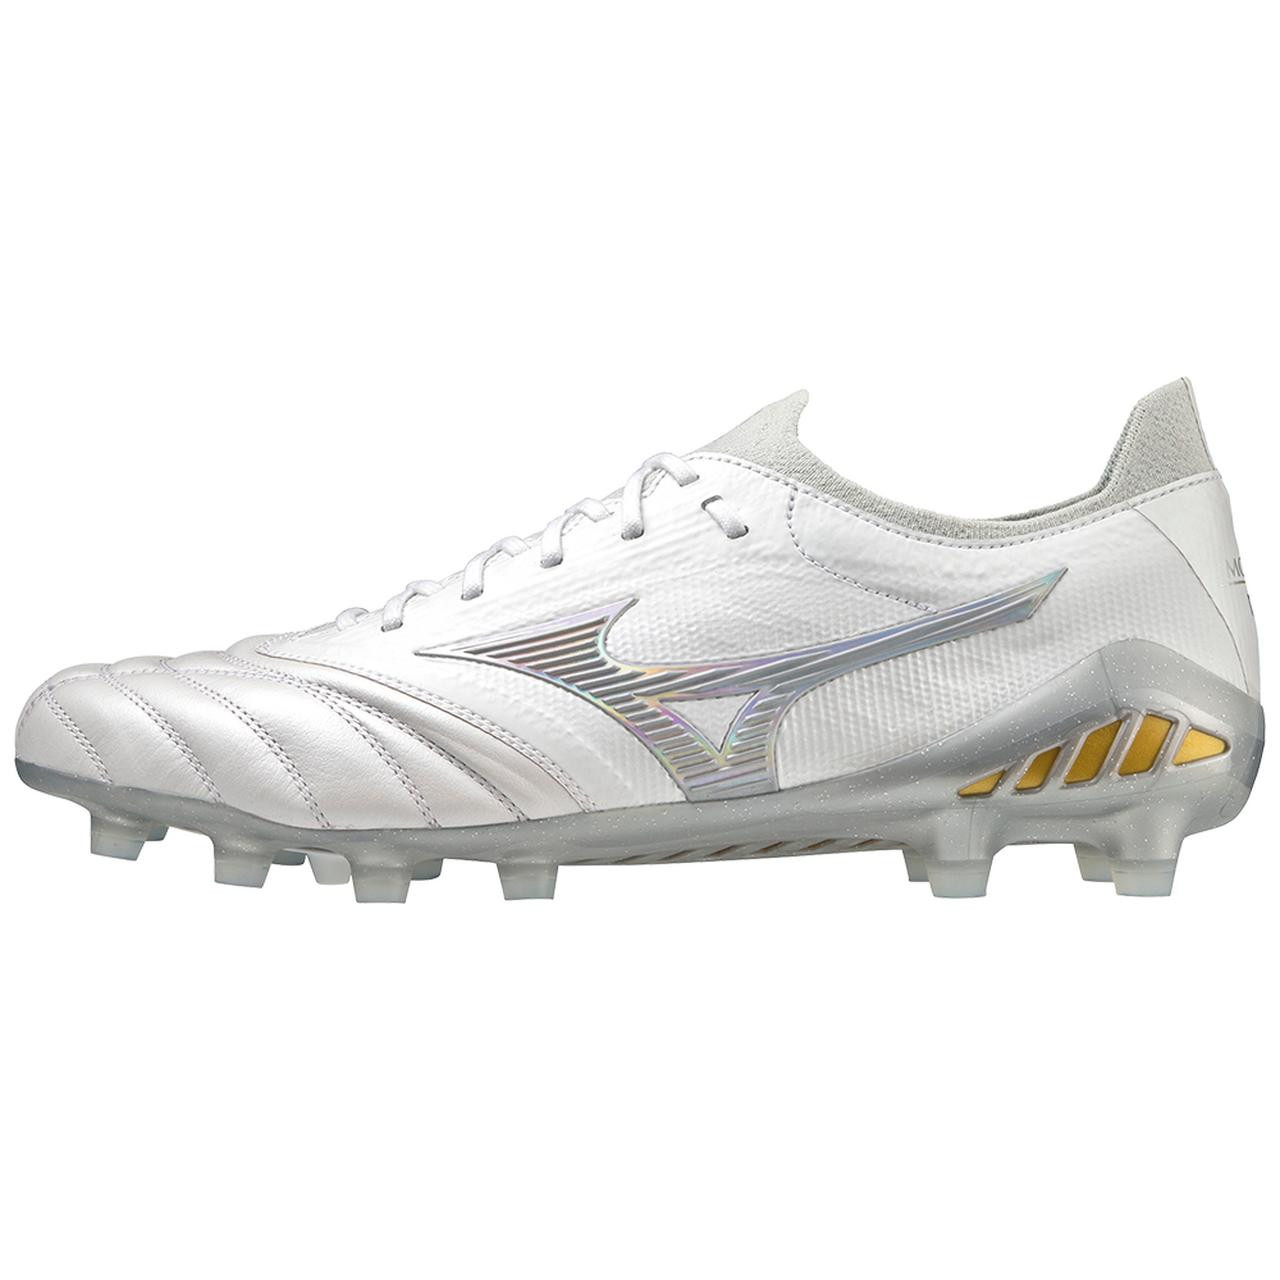 Morelia Neo III Beta Made in Japan Soccer Cleat